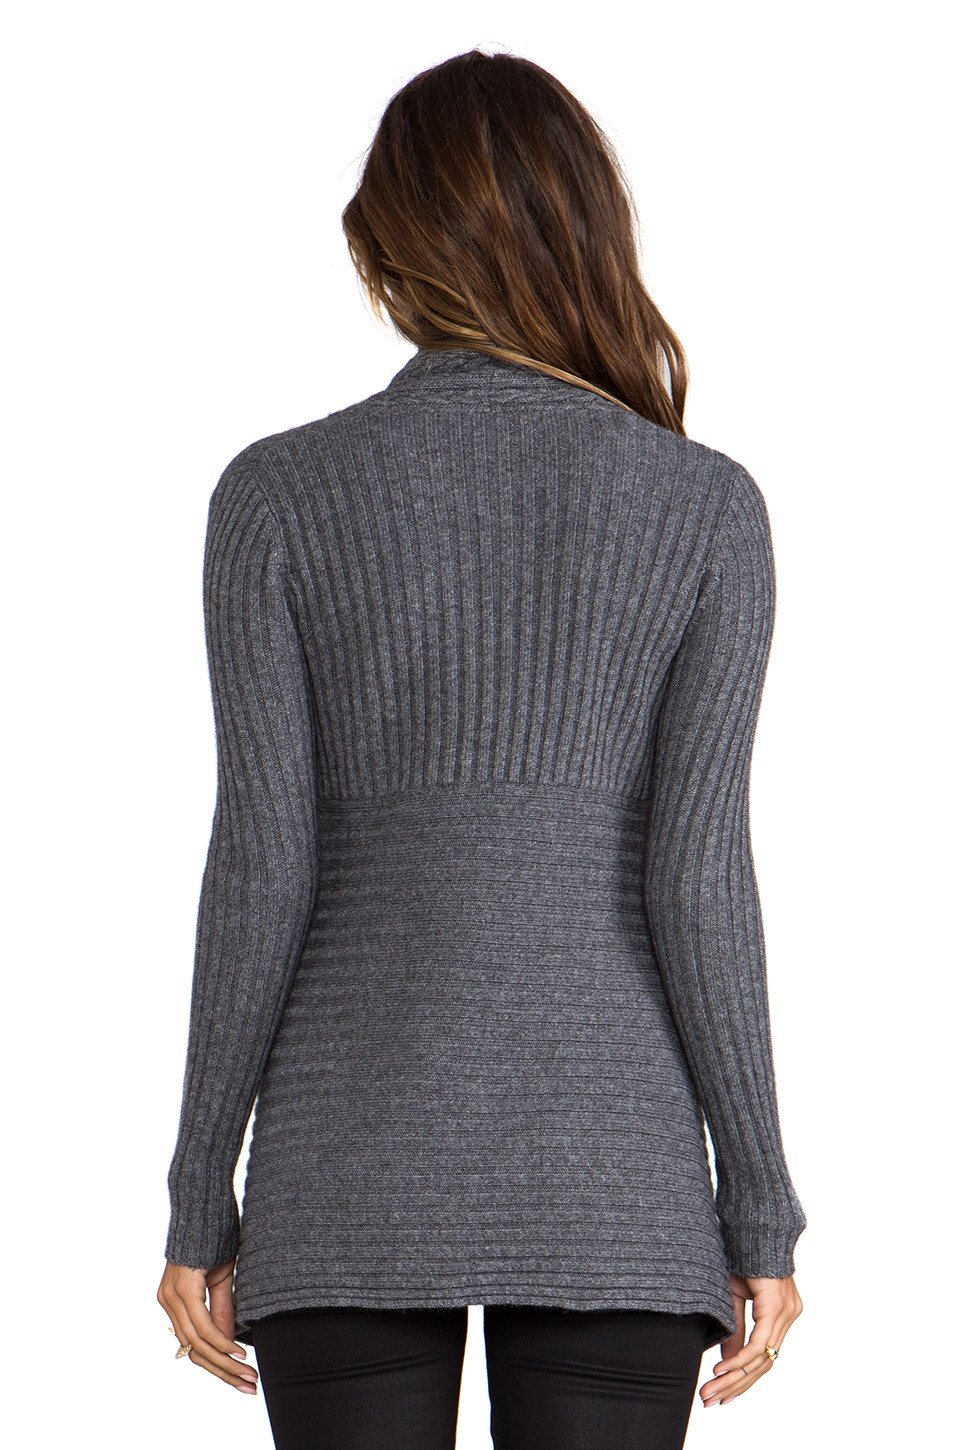 Autumn cashmere New Rib Drape with Cable in Gray in Gray | Lyst